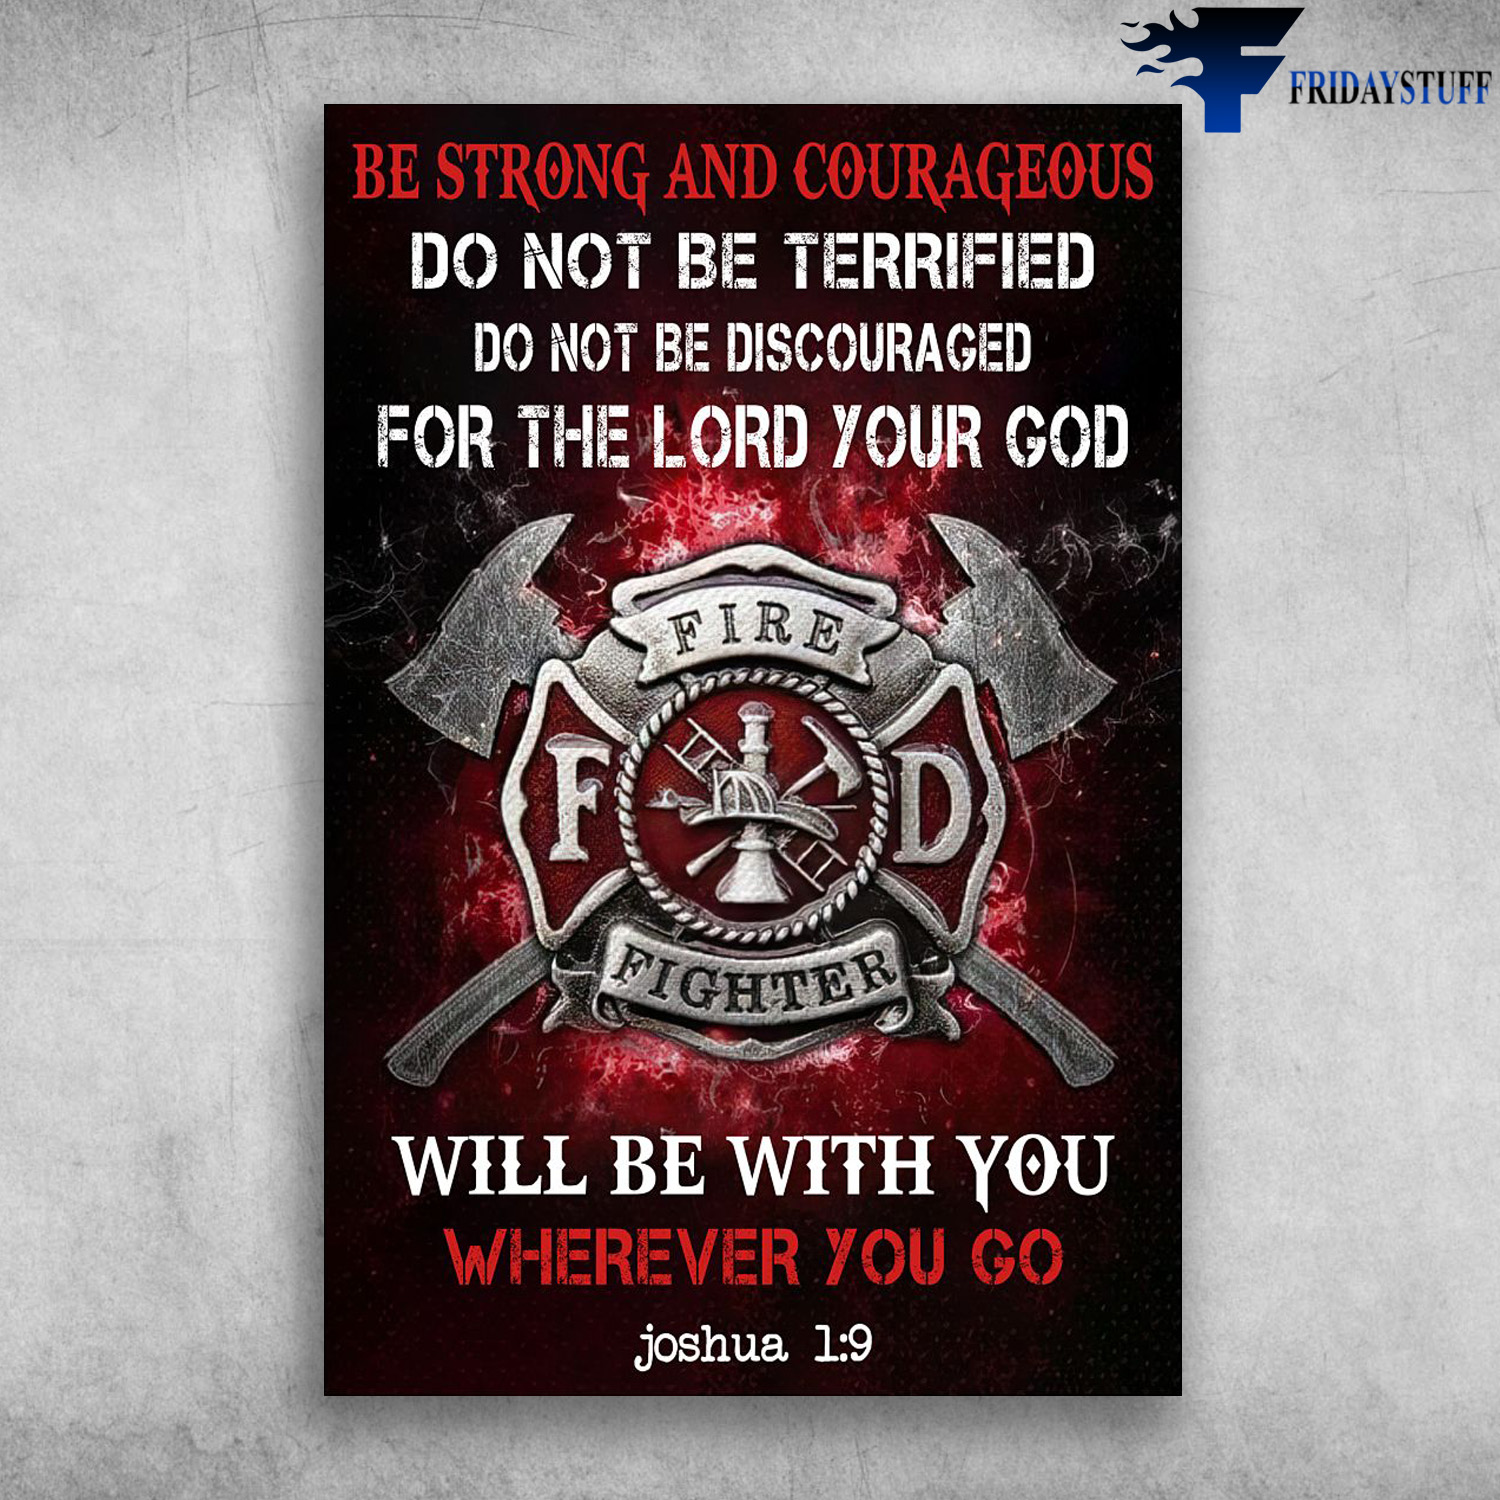 Firefighter Badges - Be Strong And Courageous , Do Not Be Terrified, DO Not Be Discouraged, For The Lord Your God, Will Be With You, Wherever You Go, Joshua 1.9